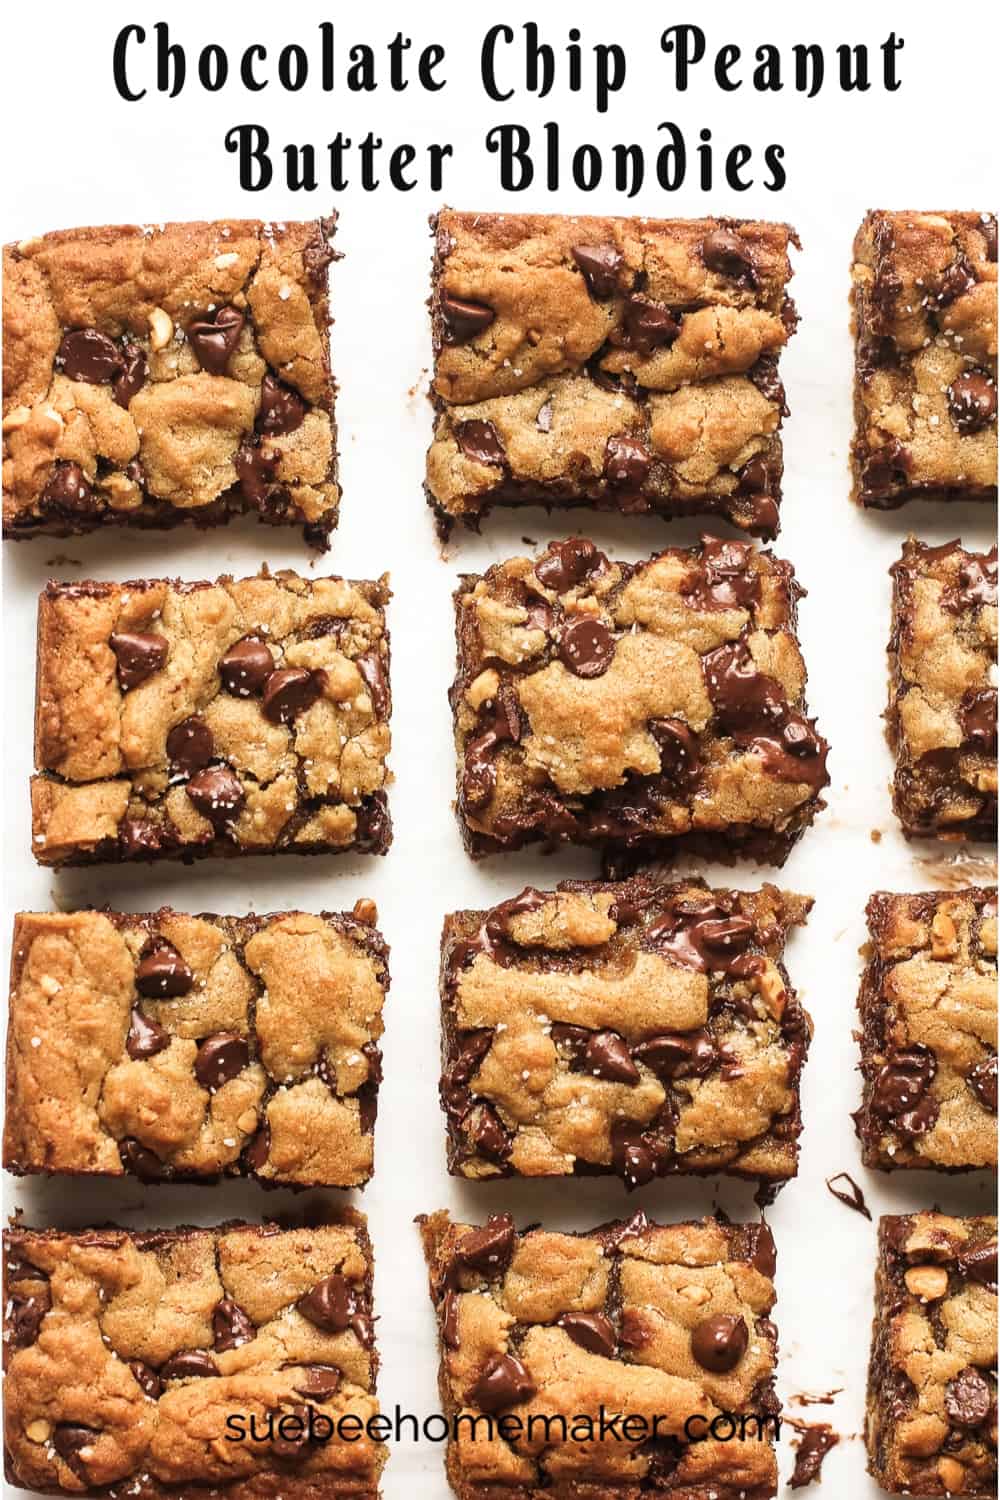 Overhead view of chocolate chip peanut butter blondies.